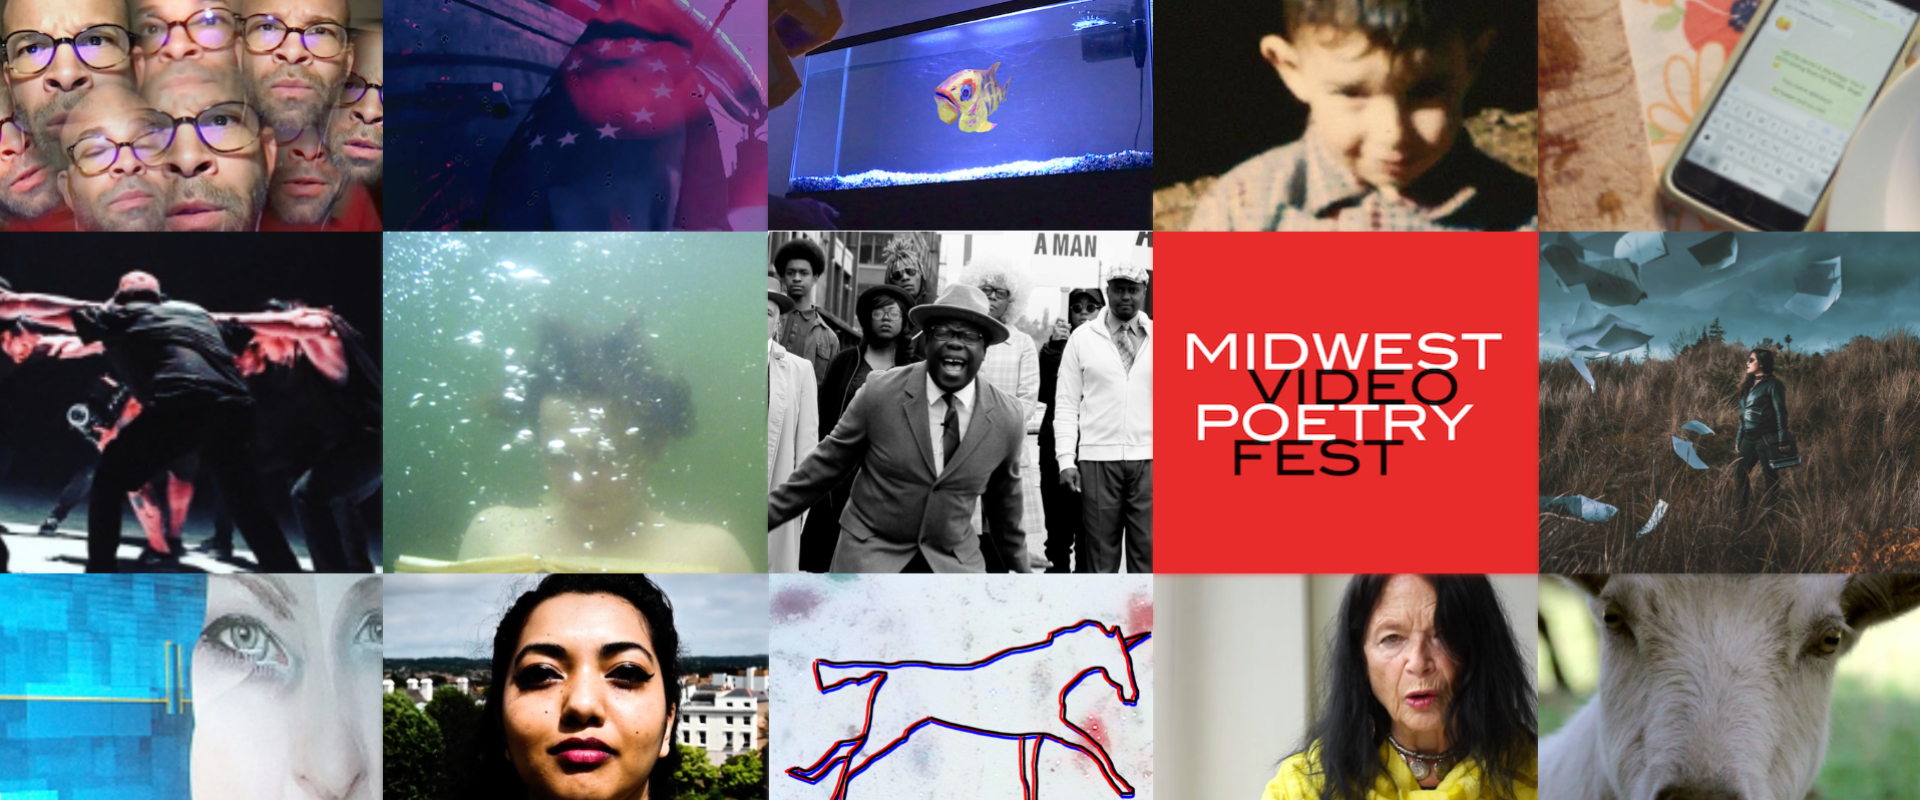 Midwest Video Poetry Fest grid with logo and stills from previous years